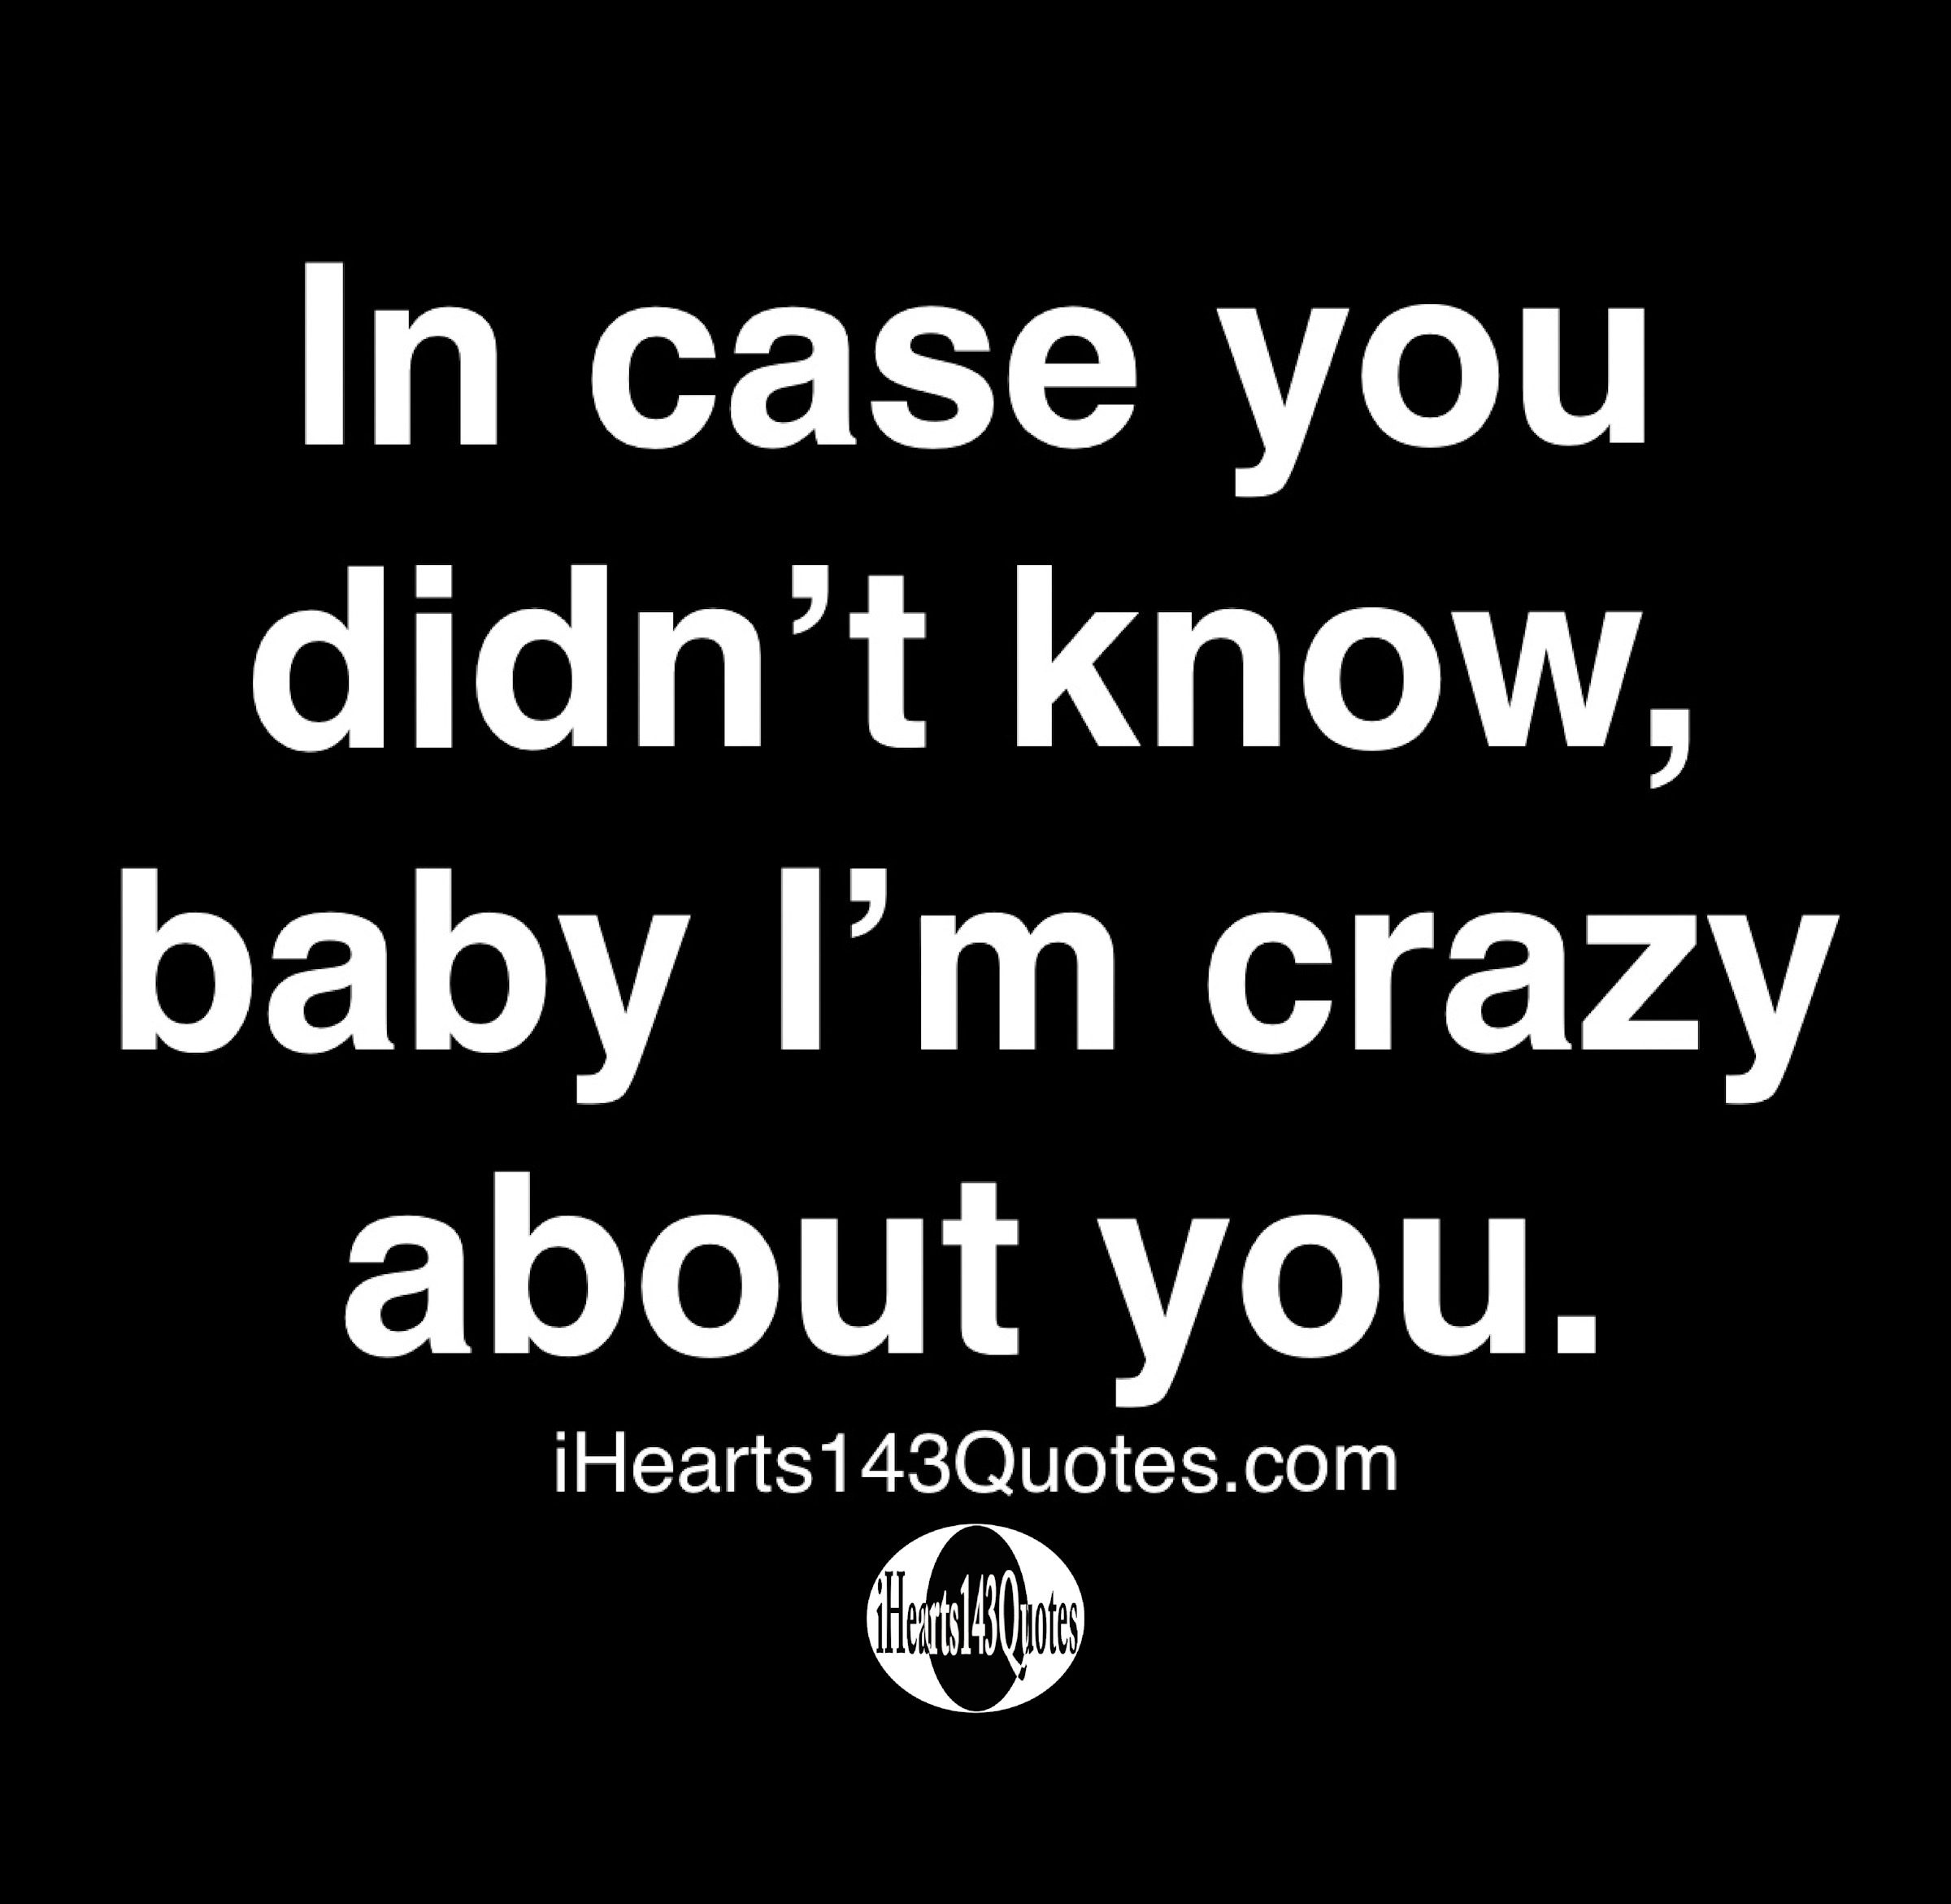 In Case You Didn T Know Baby I M Crazy About You Quotes Ihearts143quotes